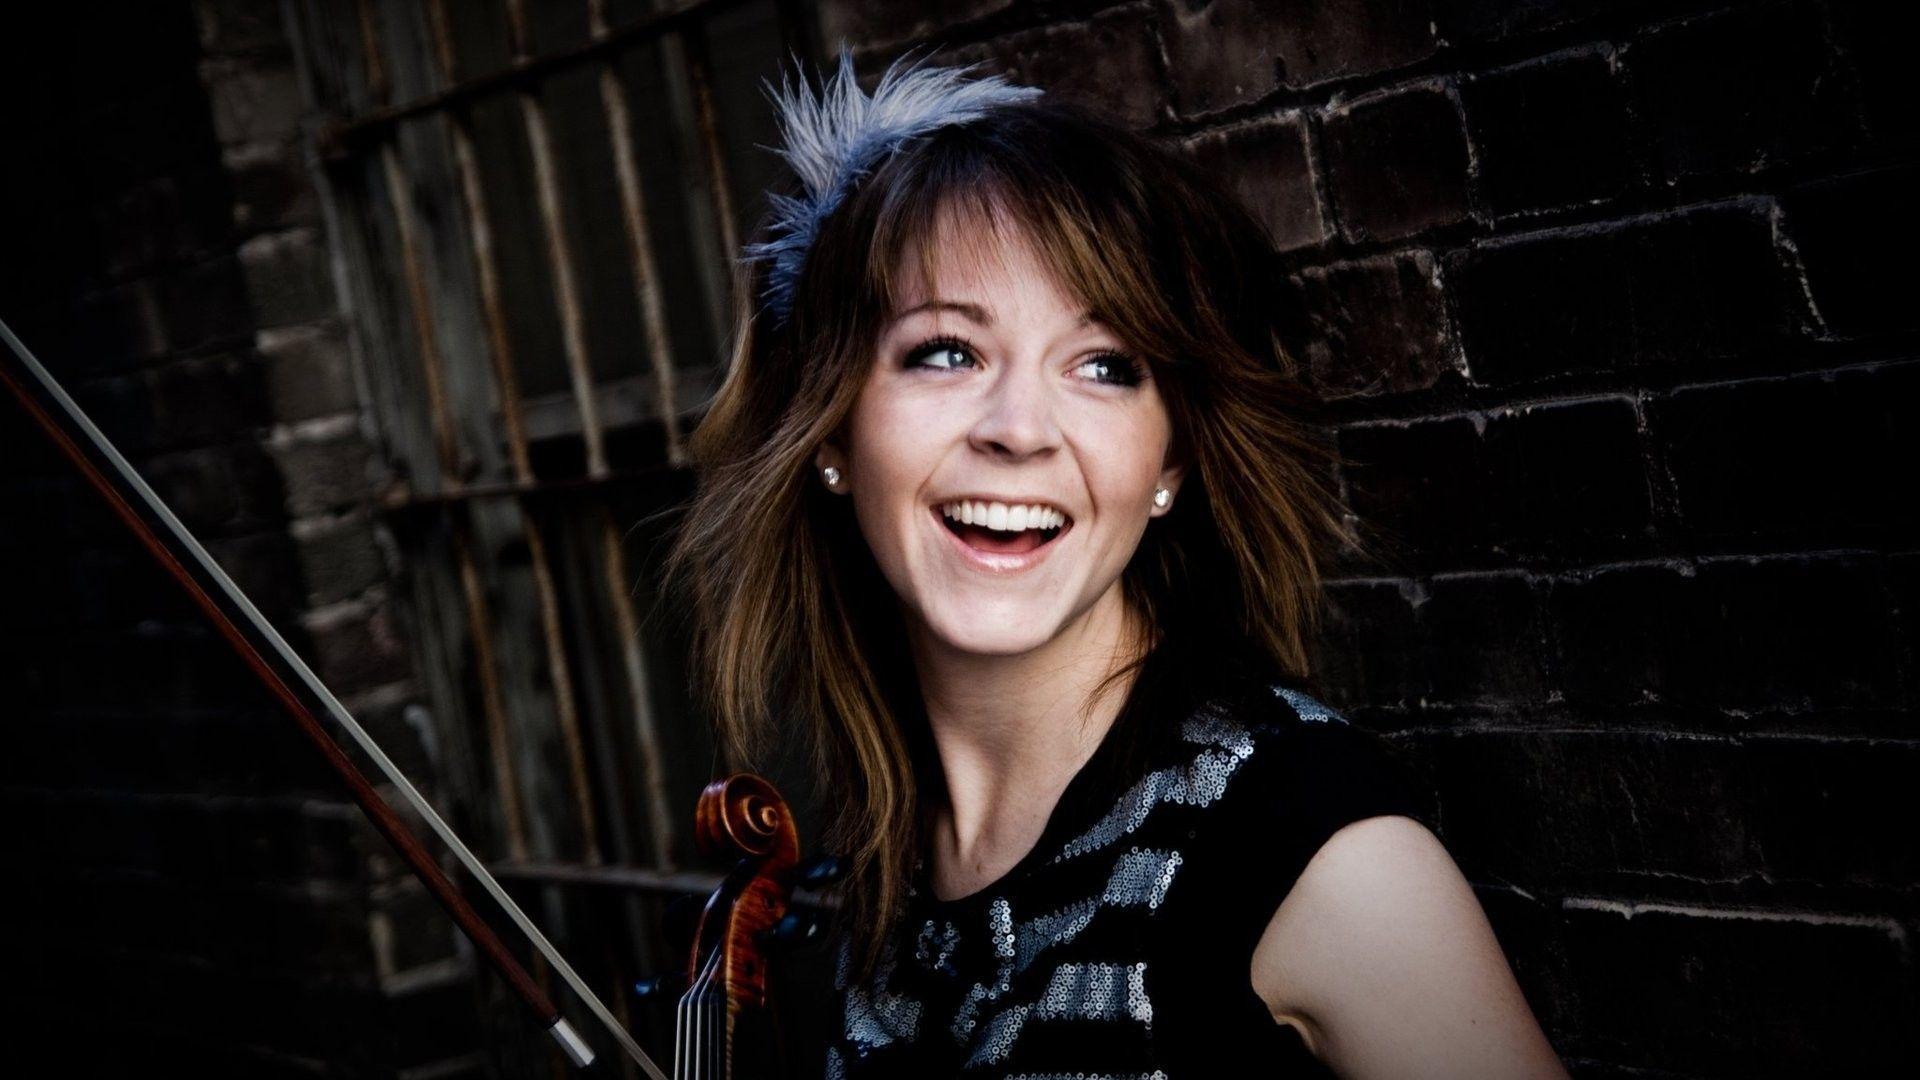 Lindsey Stirling Wallpaper for PC. Full HD Picture